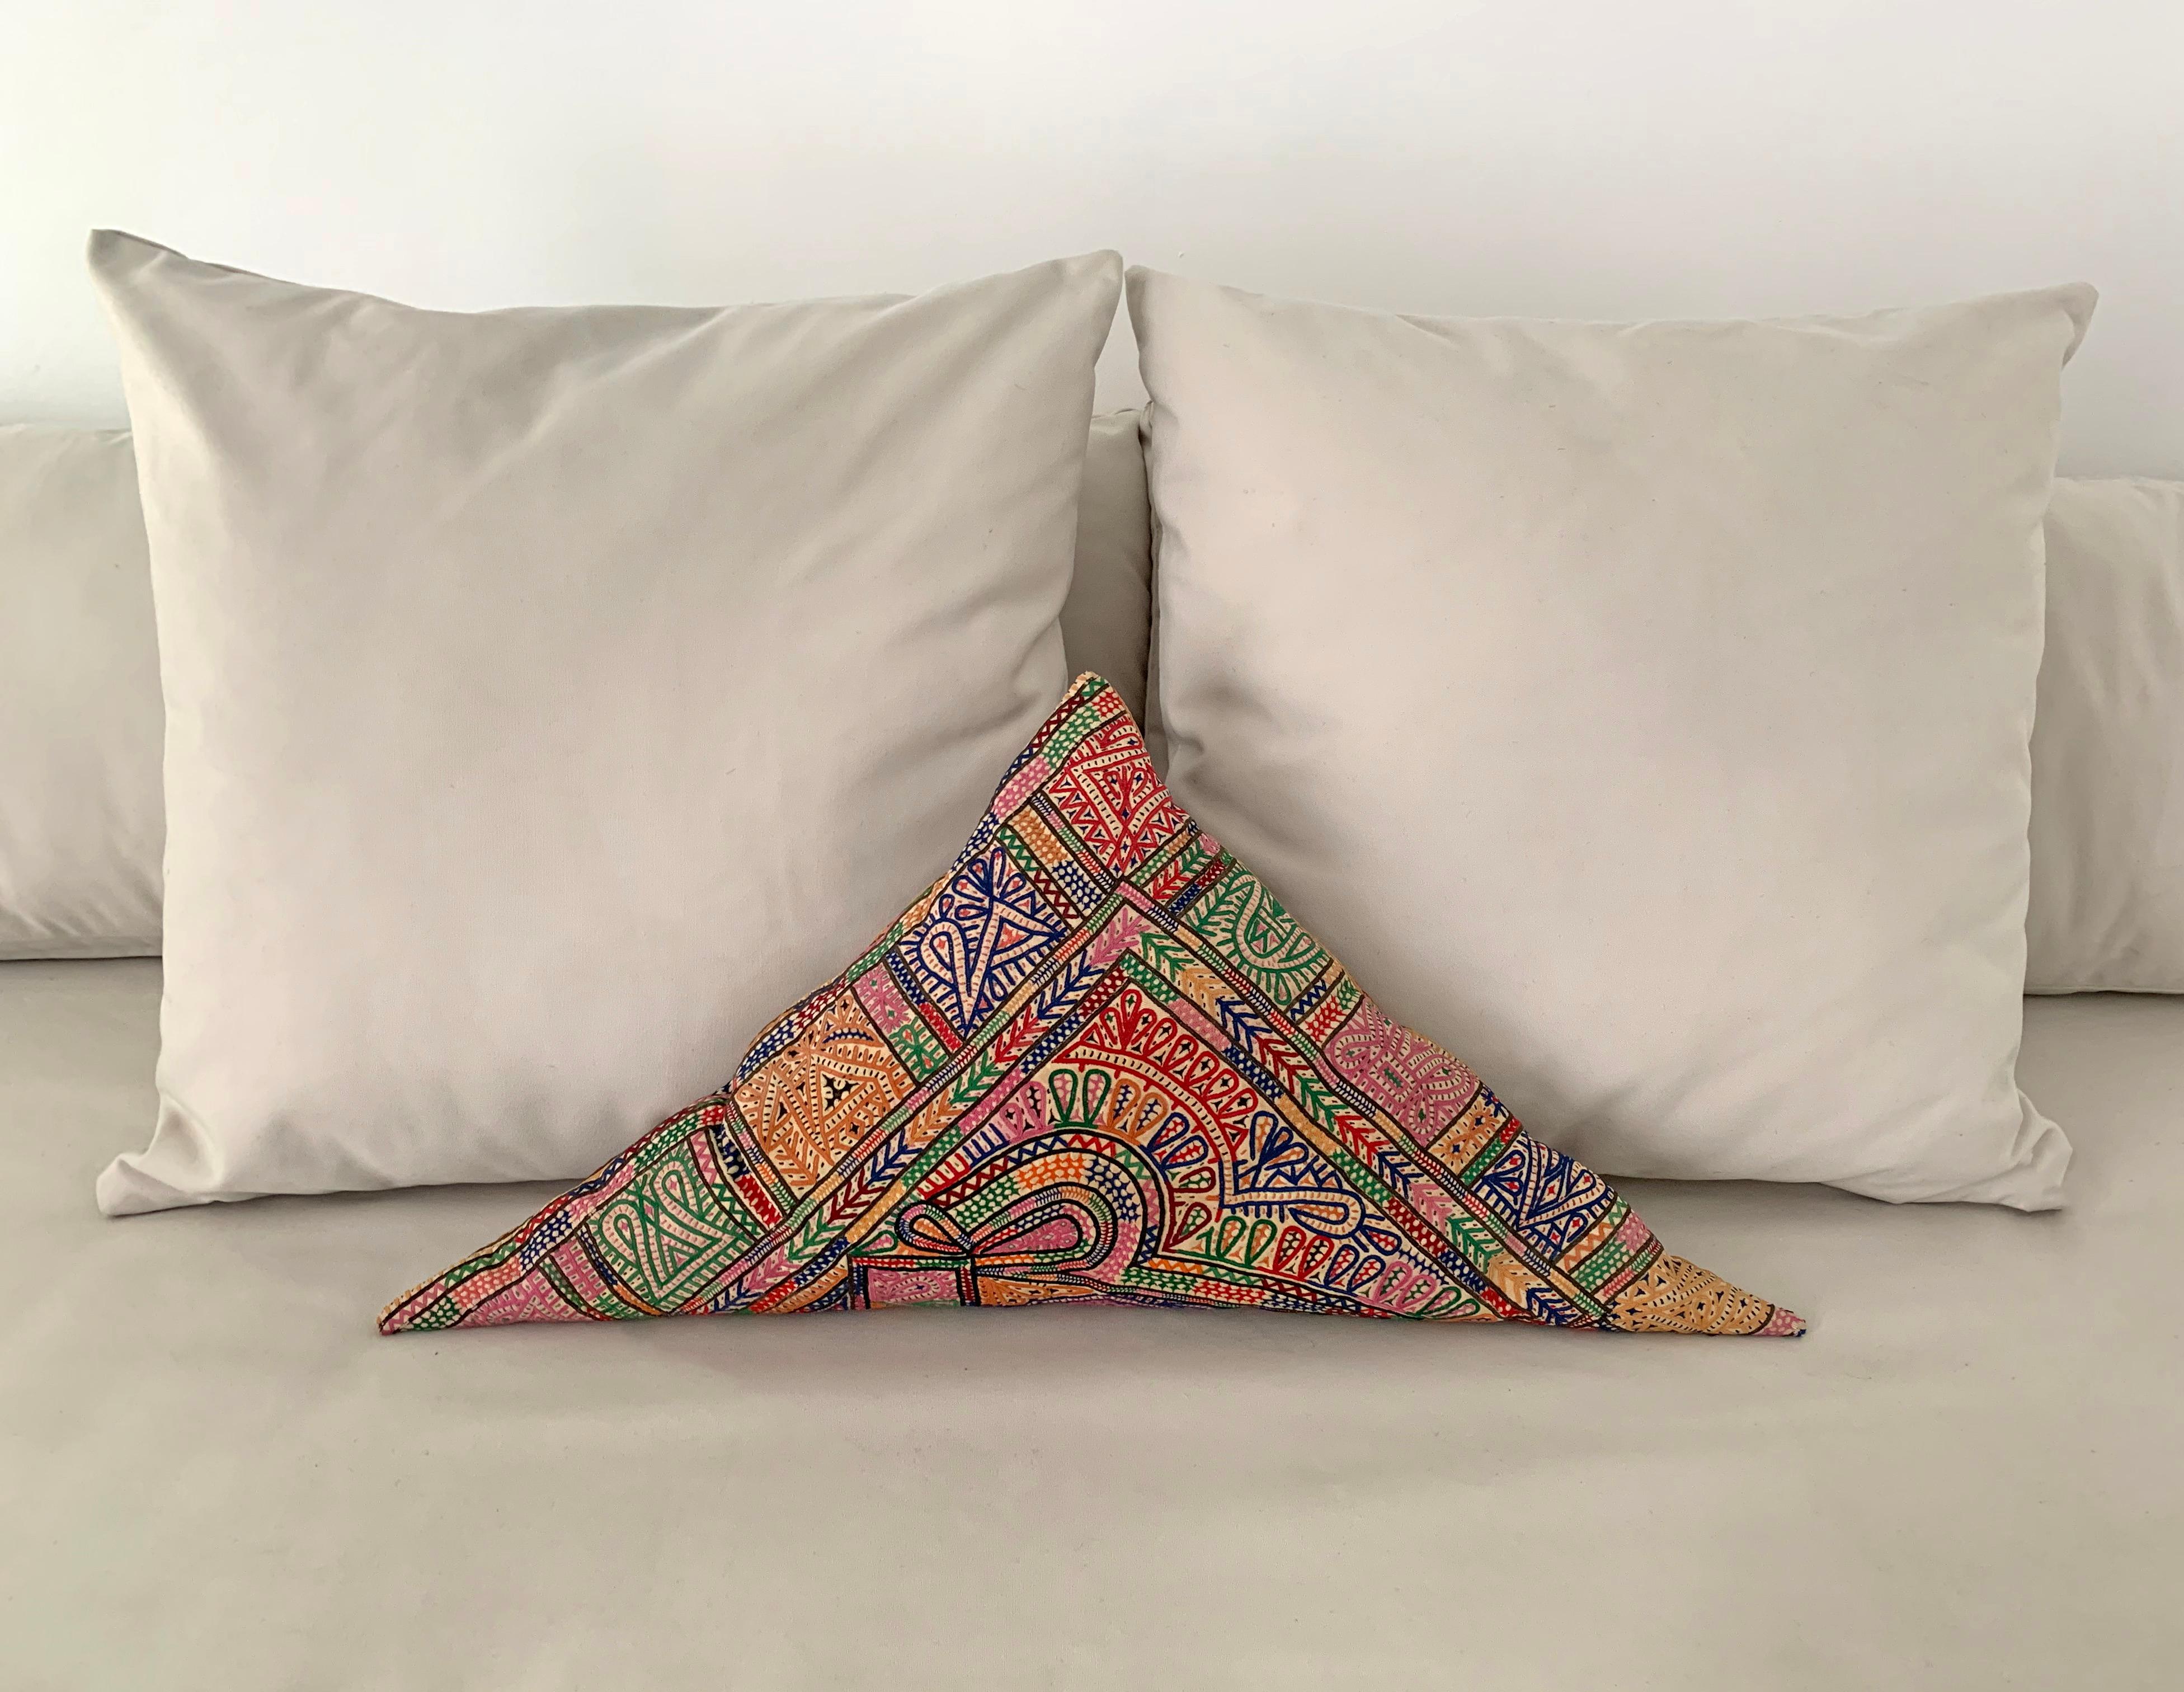 This vintage pillow features colourful embroidery and was made using vintage Indian fabric. It features a zip on the side to remove/clean the pillow insert. 

Size: Height 36cm x Width 79cm x Depth 9cm.